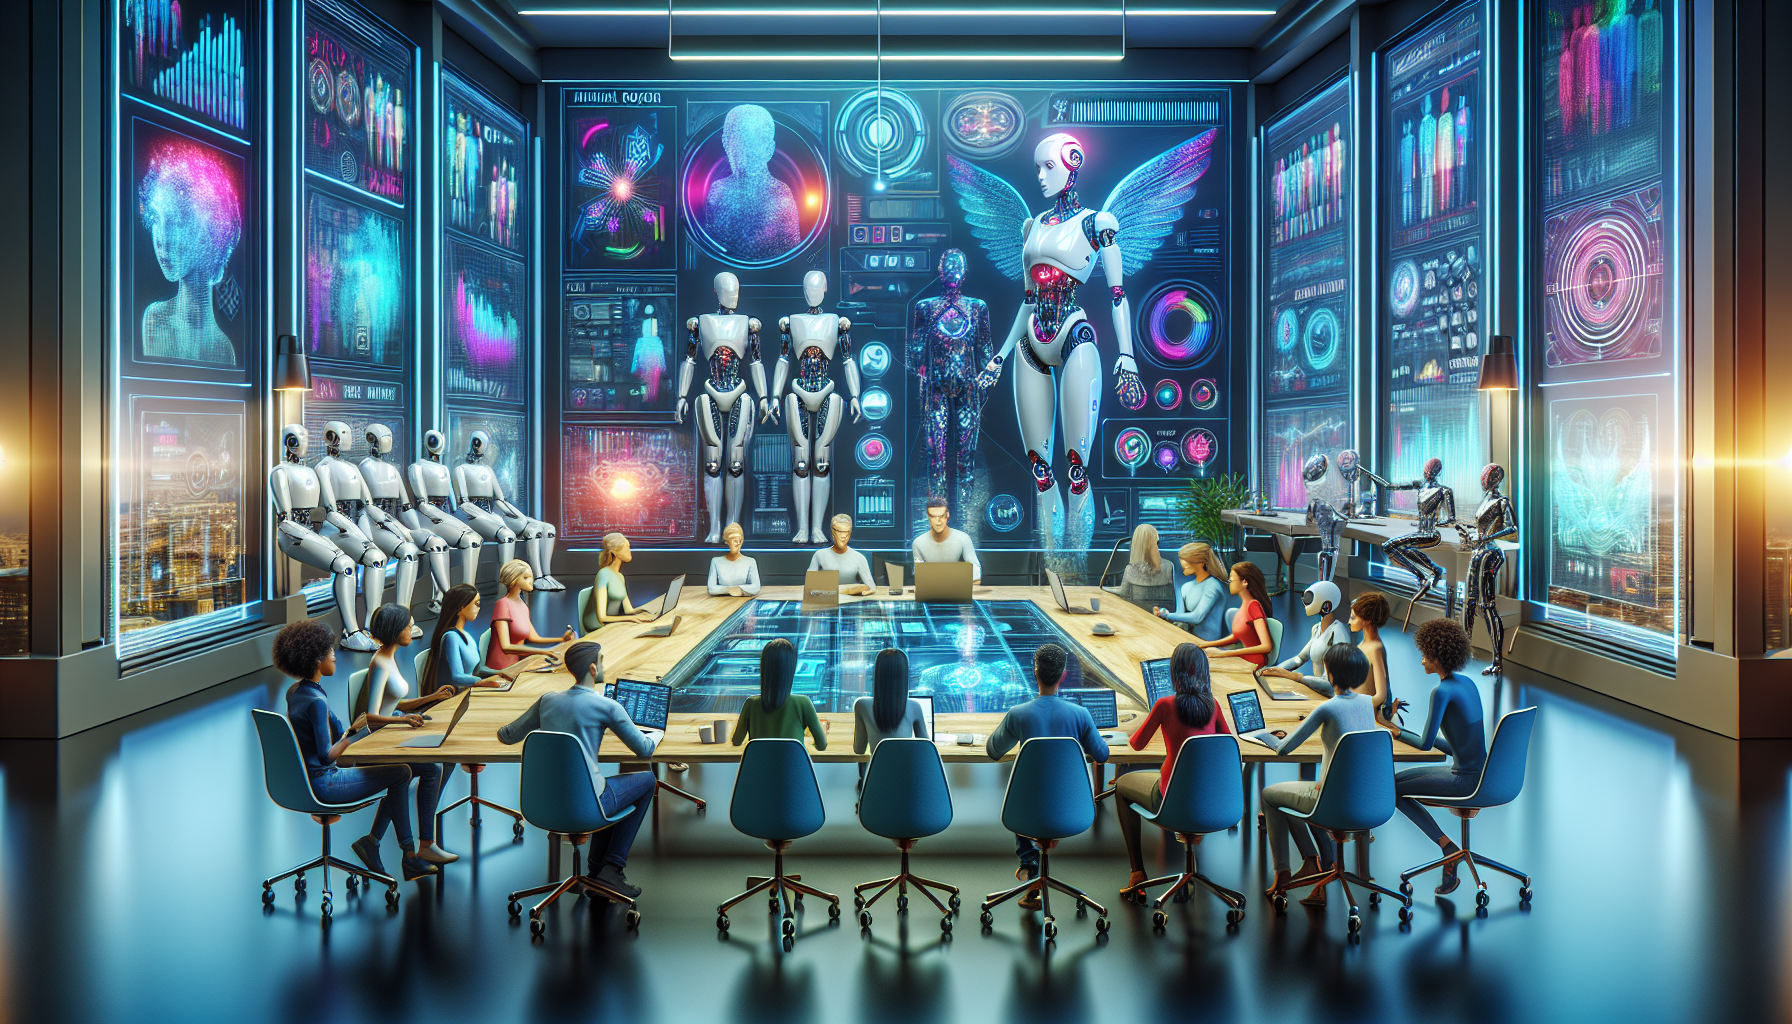 A futuristic writer's room where diverse AI robots and human authors collaborate around a high-tech, holographic table, brainstorming and visualizing complex story plots in a creative studio environme